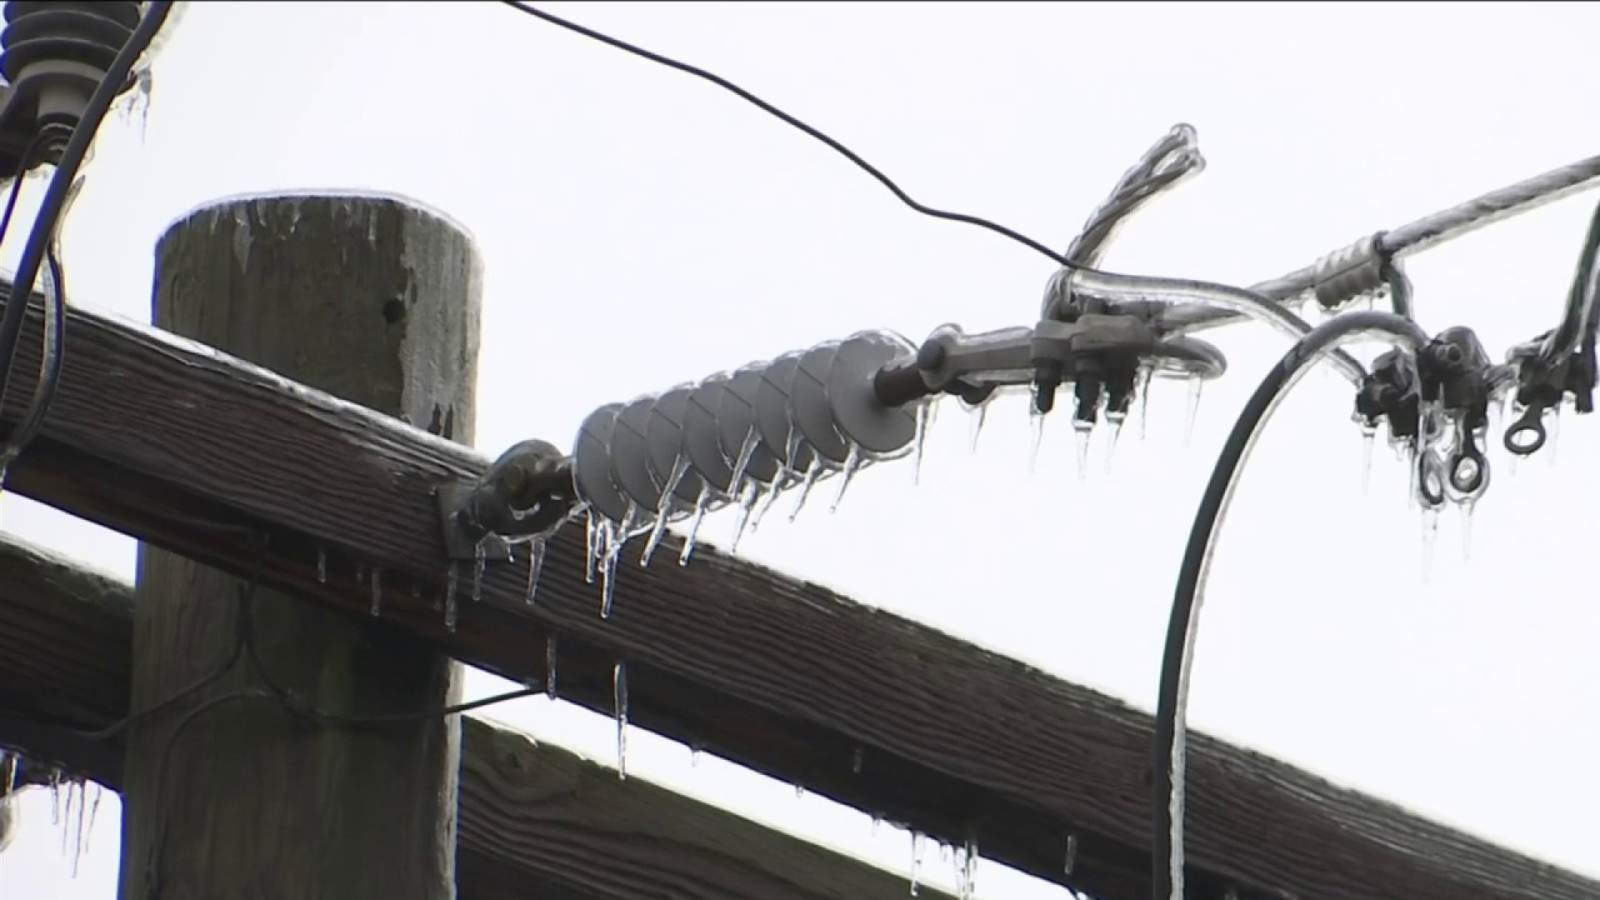 Most customers are subject to rotary interruptions as winter continues